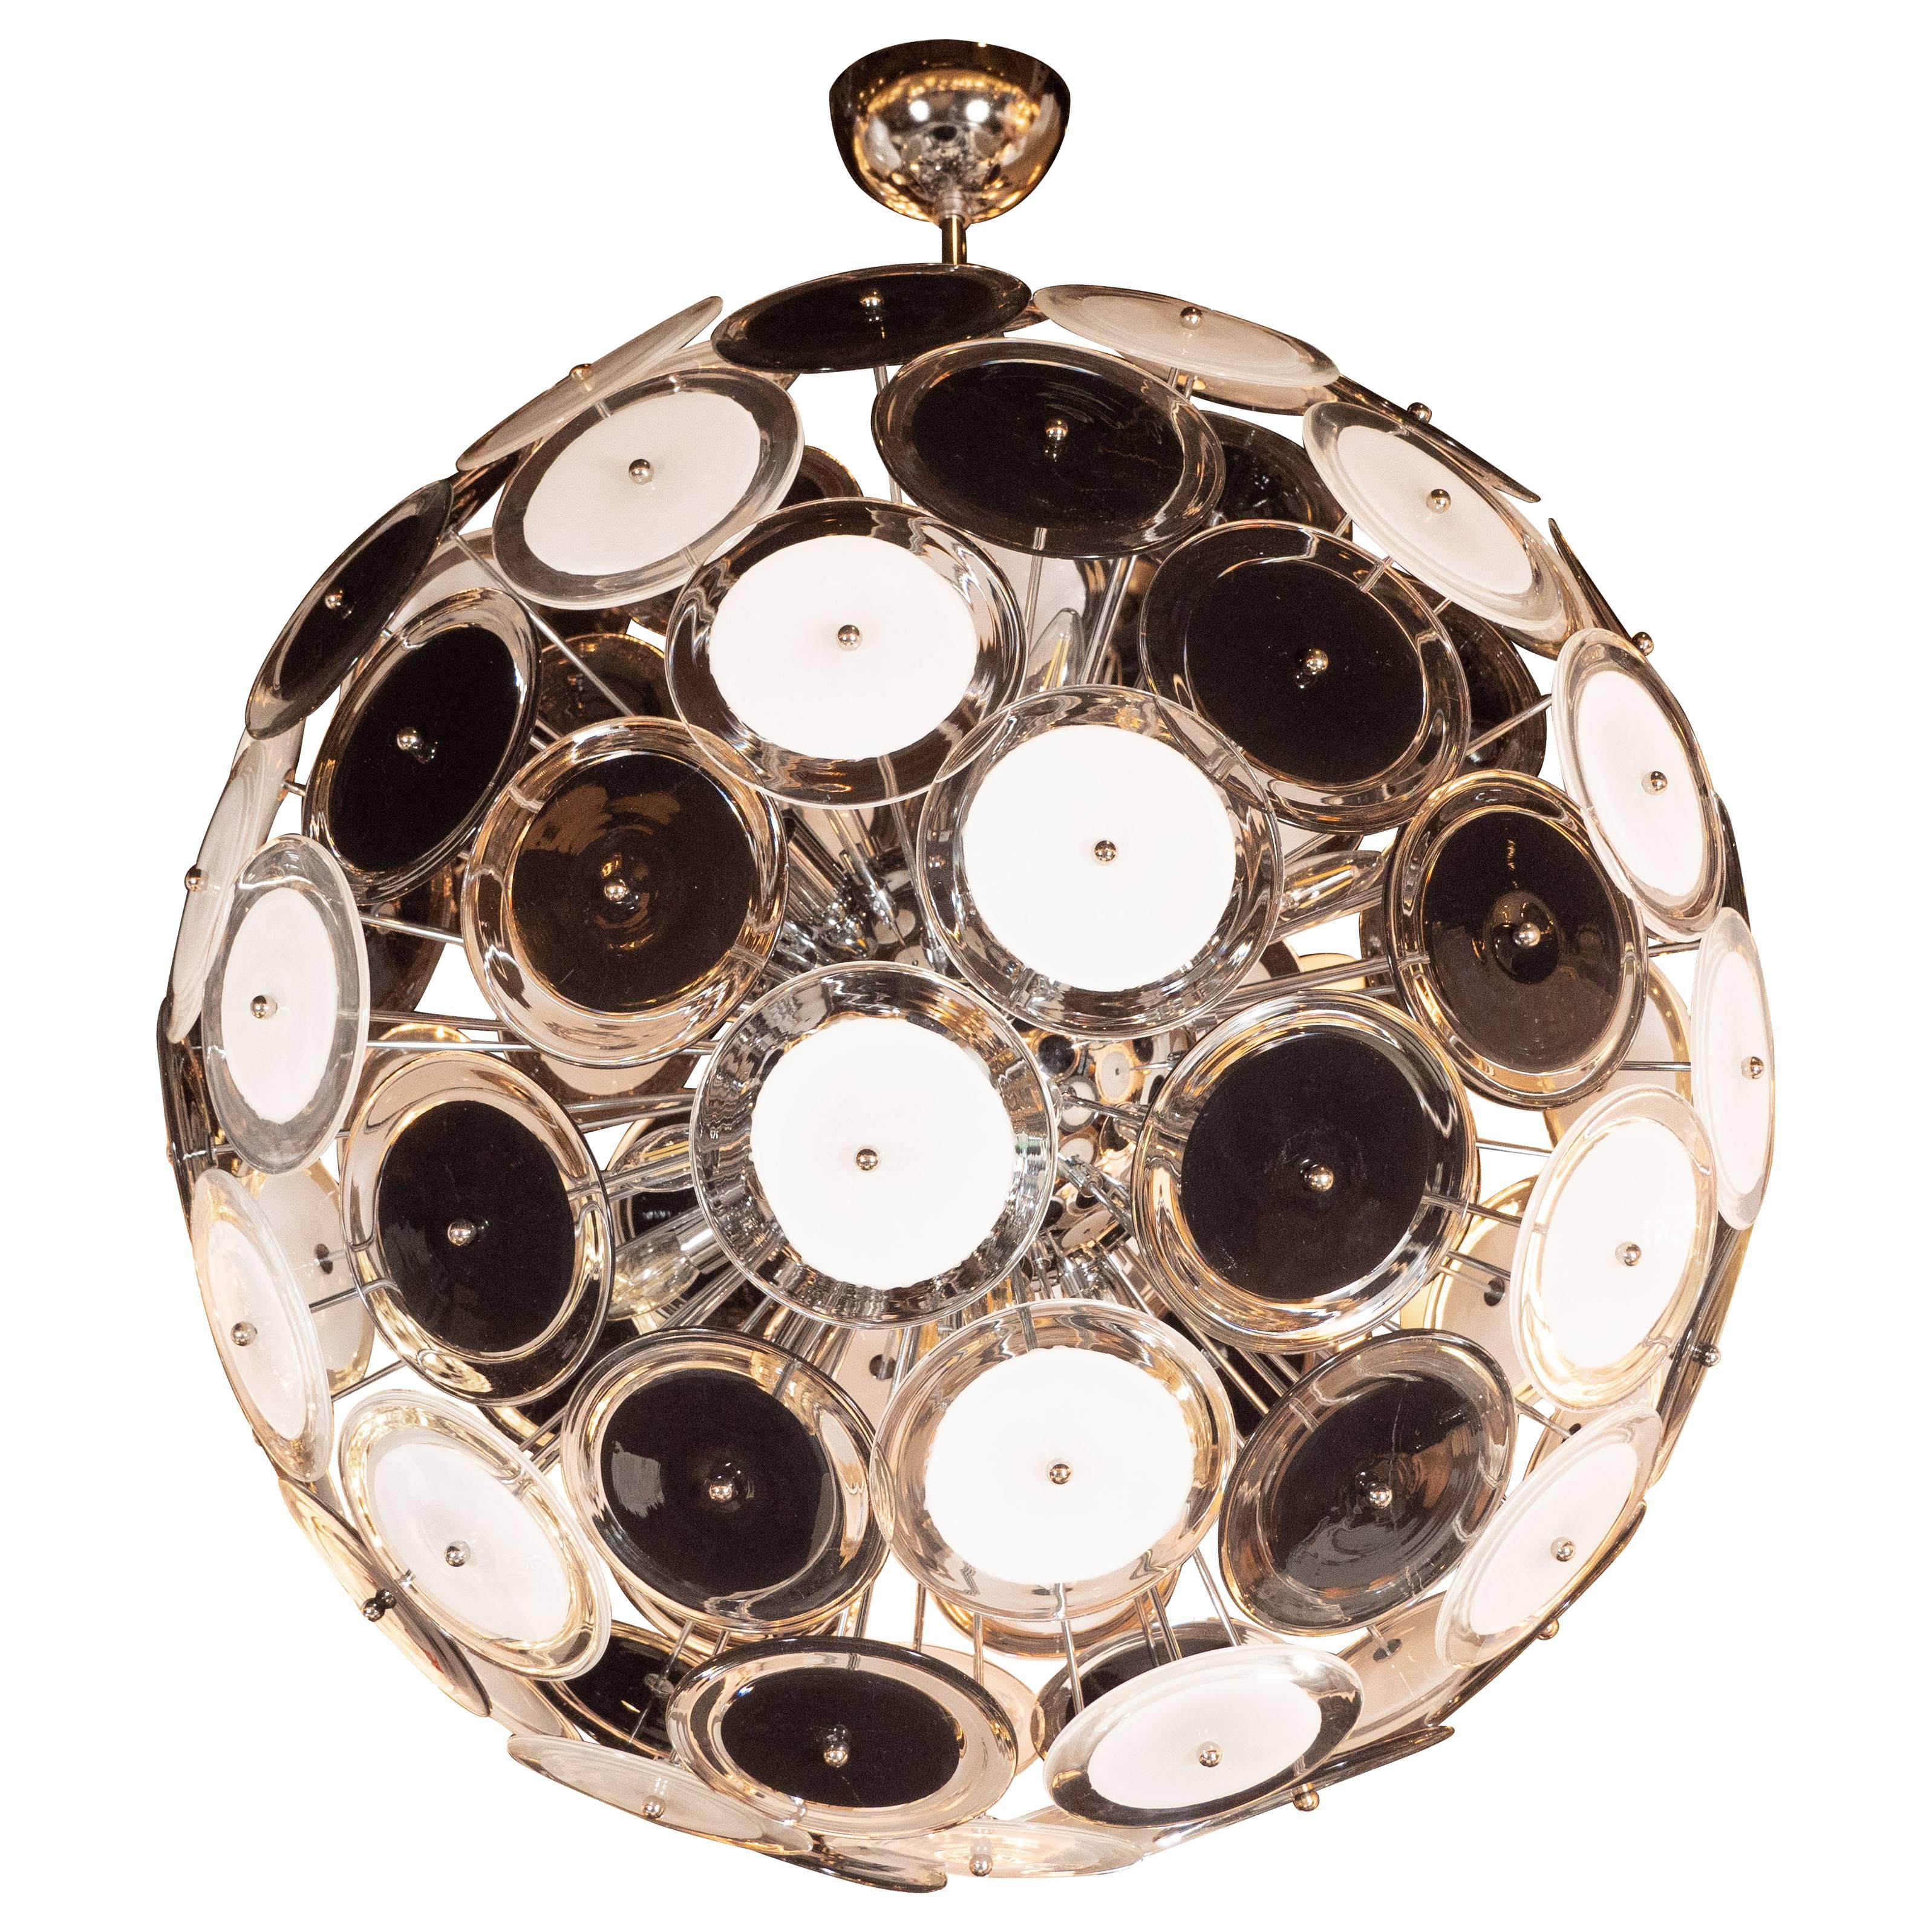 Modernist Polished Chrome Chandelier with Handblown Murano Black and White Discs For Sale